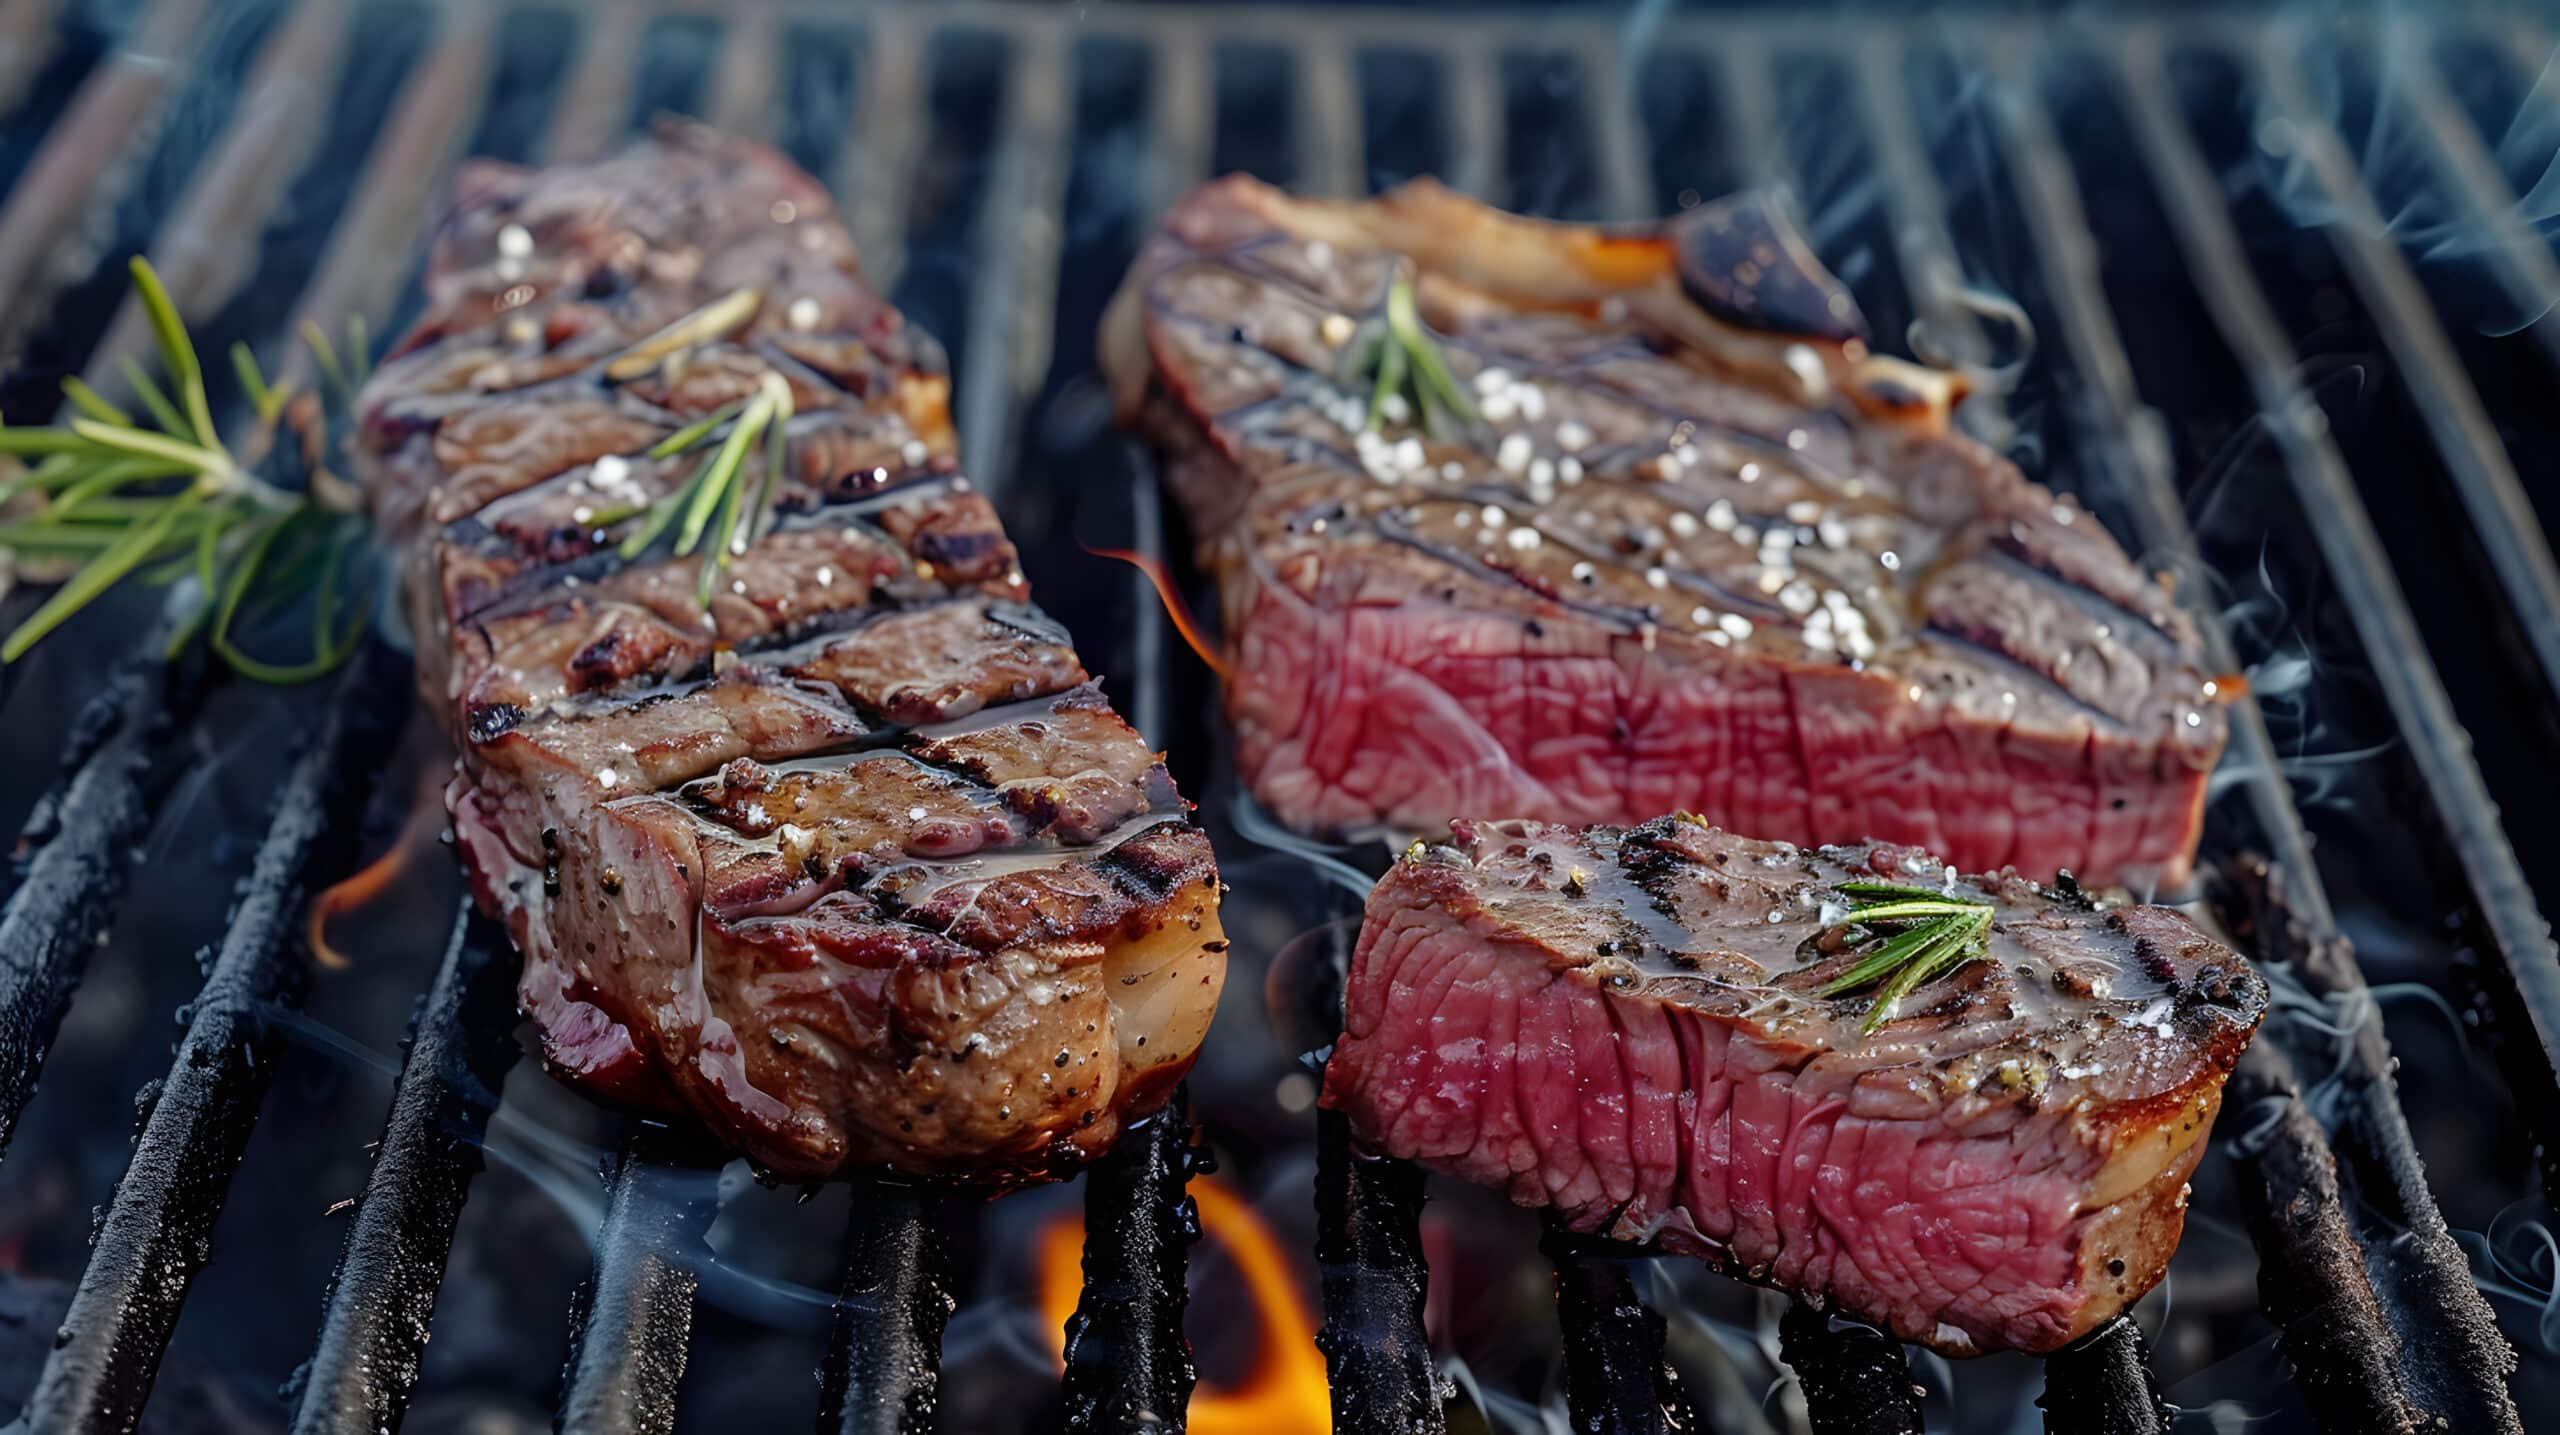 www.appr.com : How Long To Grill Steak On Gas Grill?